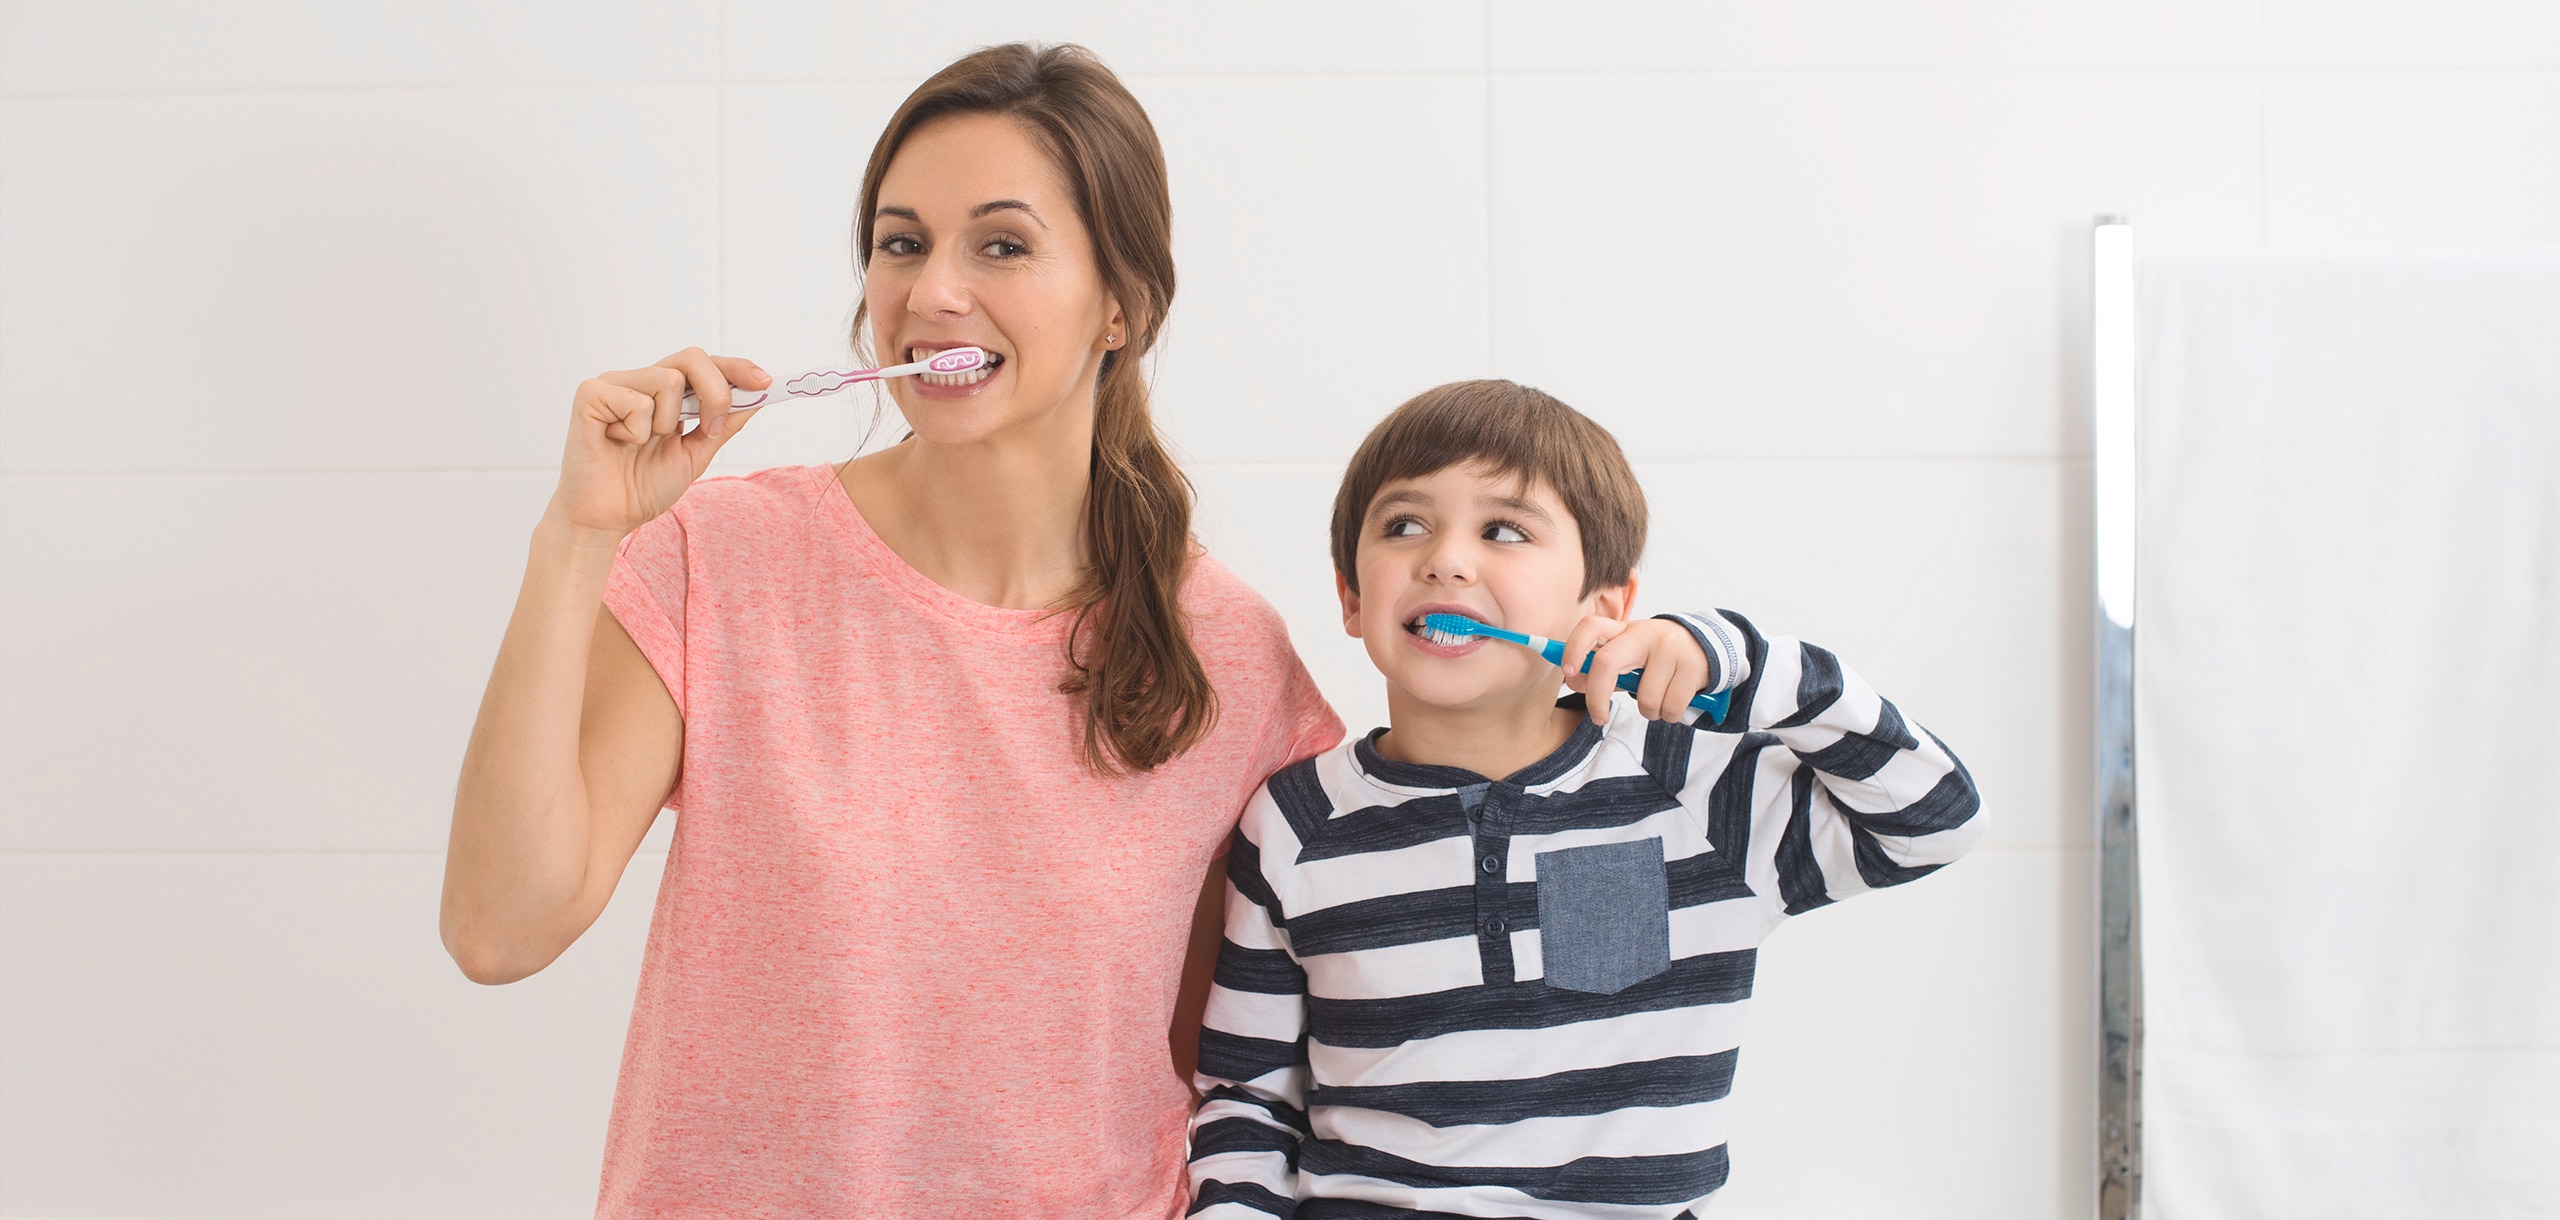 How To Brush your Teeth Properly